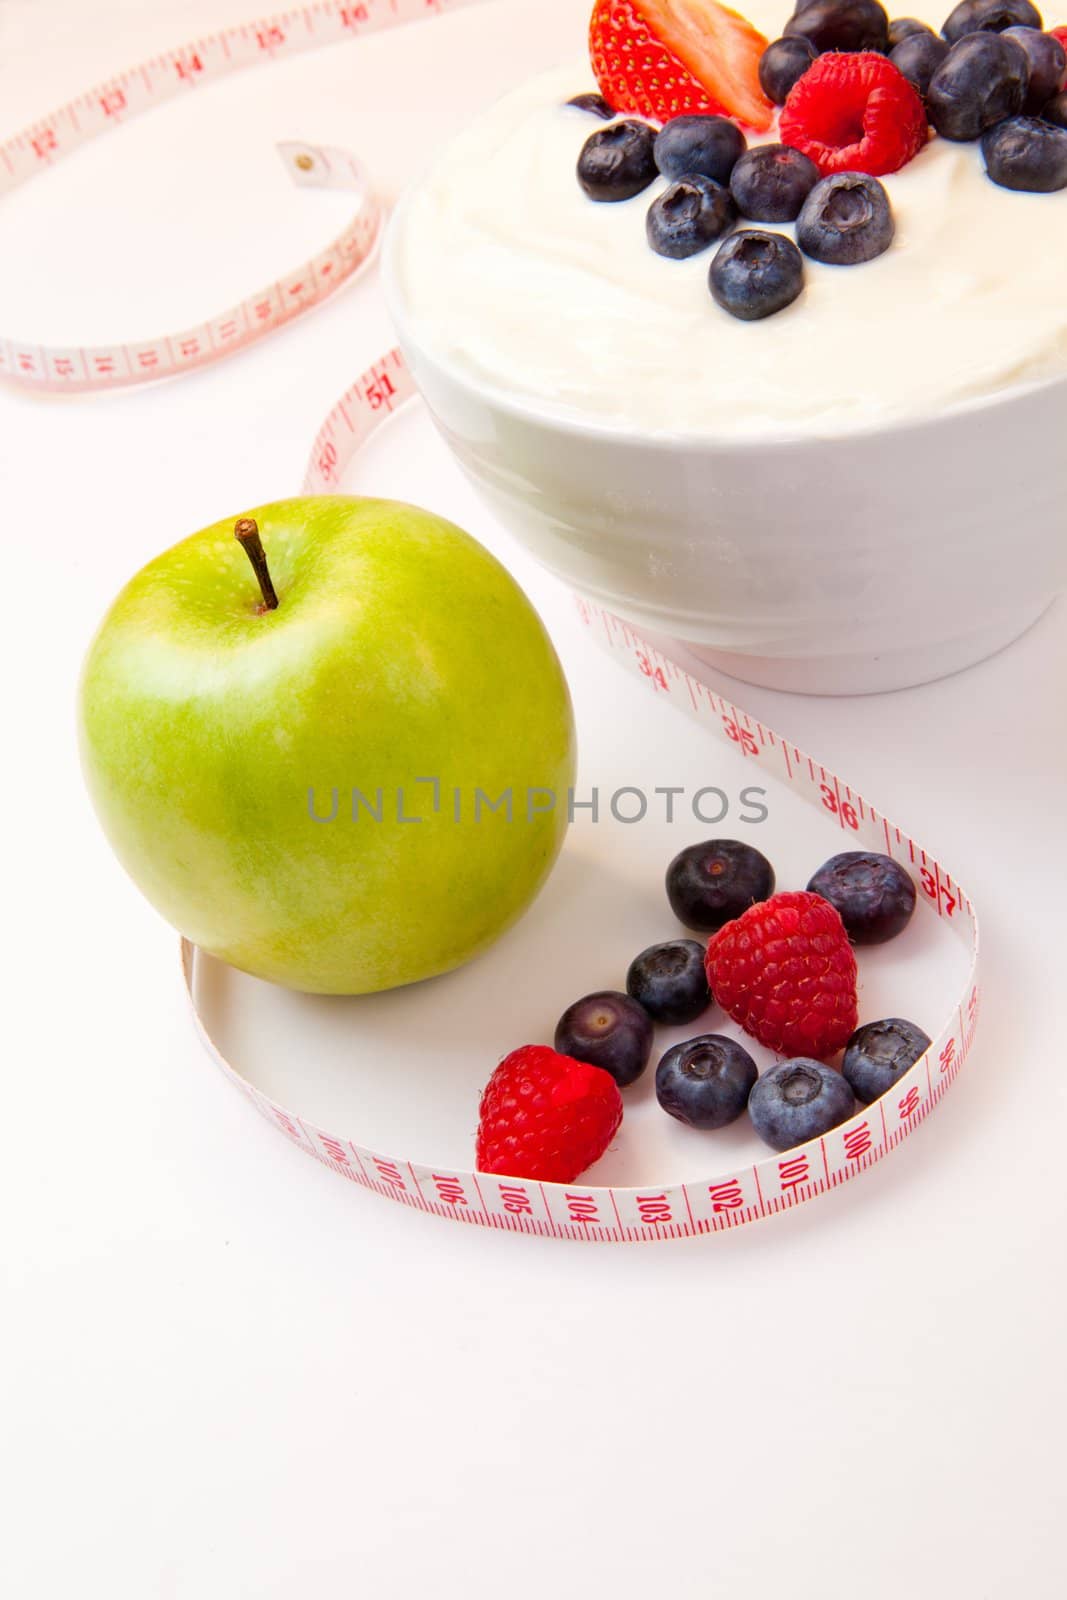 Apple and bowl of berries cream and a tape measure  by Wavebreakmedia